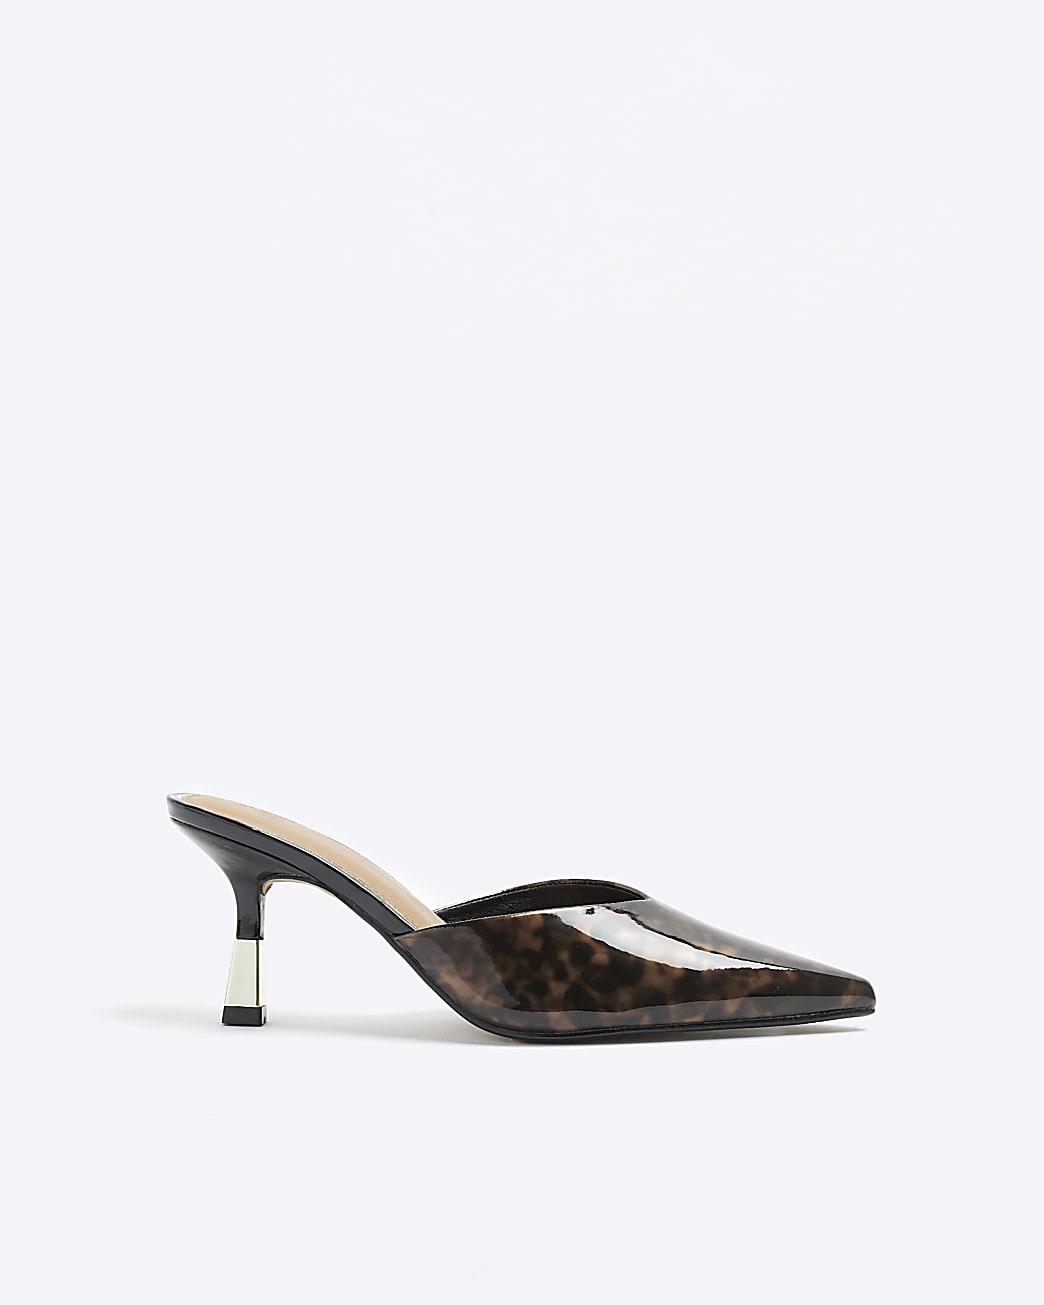 River Island Tortoise Shell Mule Pointed Court Shoes in White | Lyst